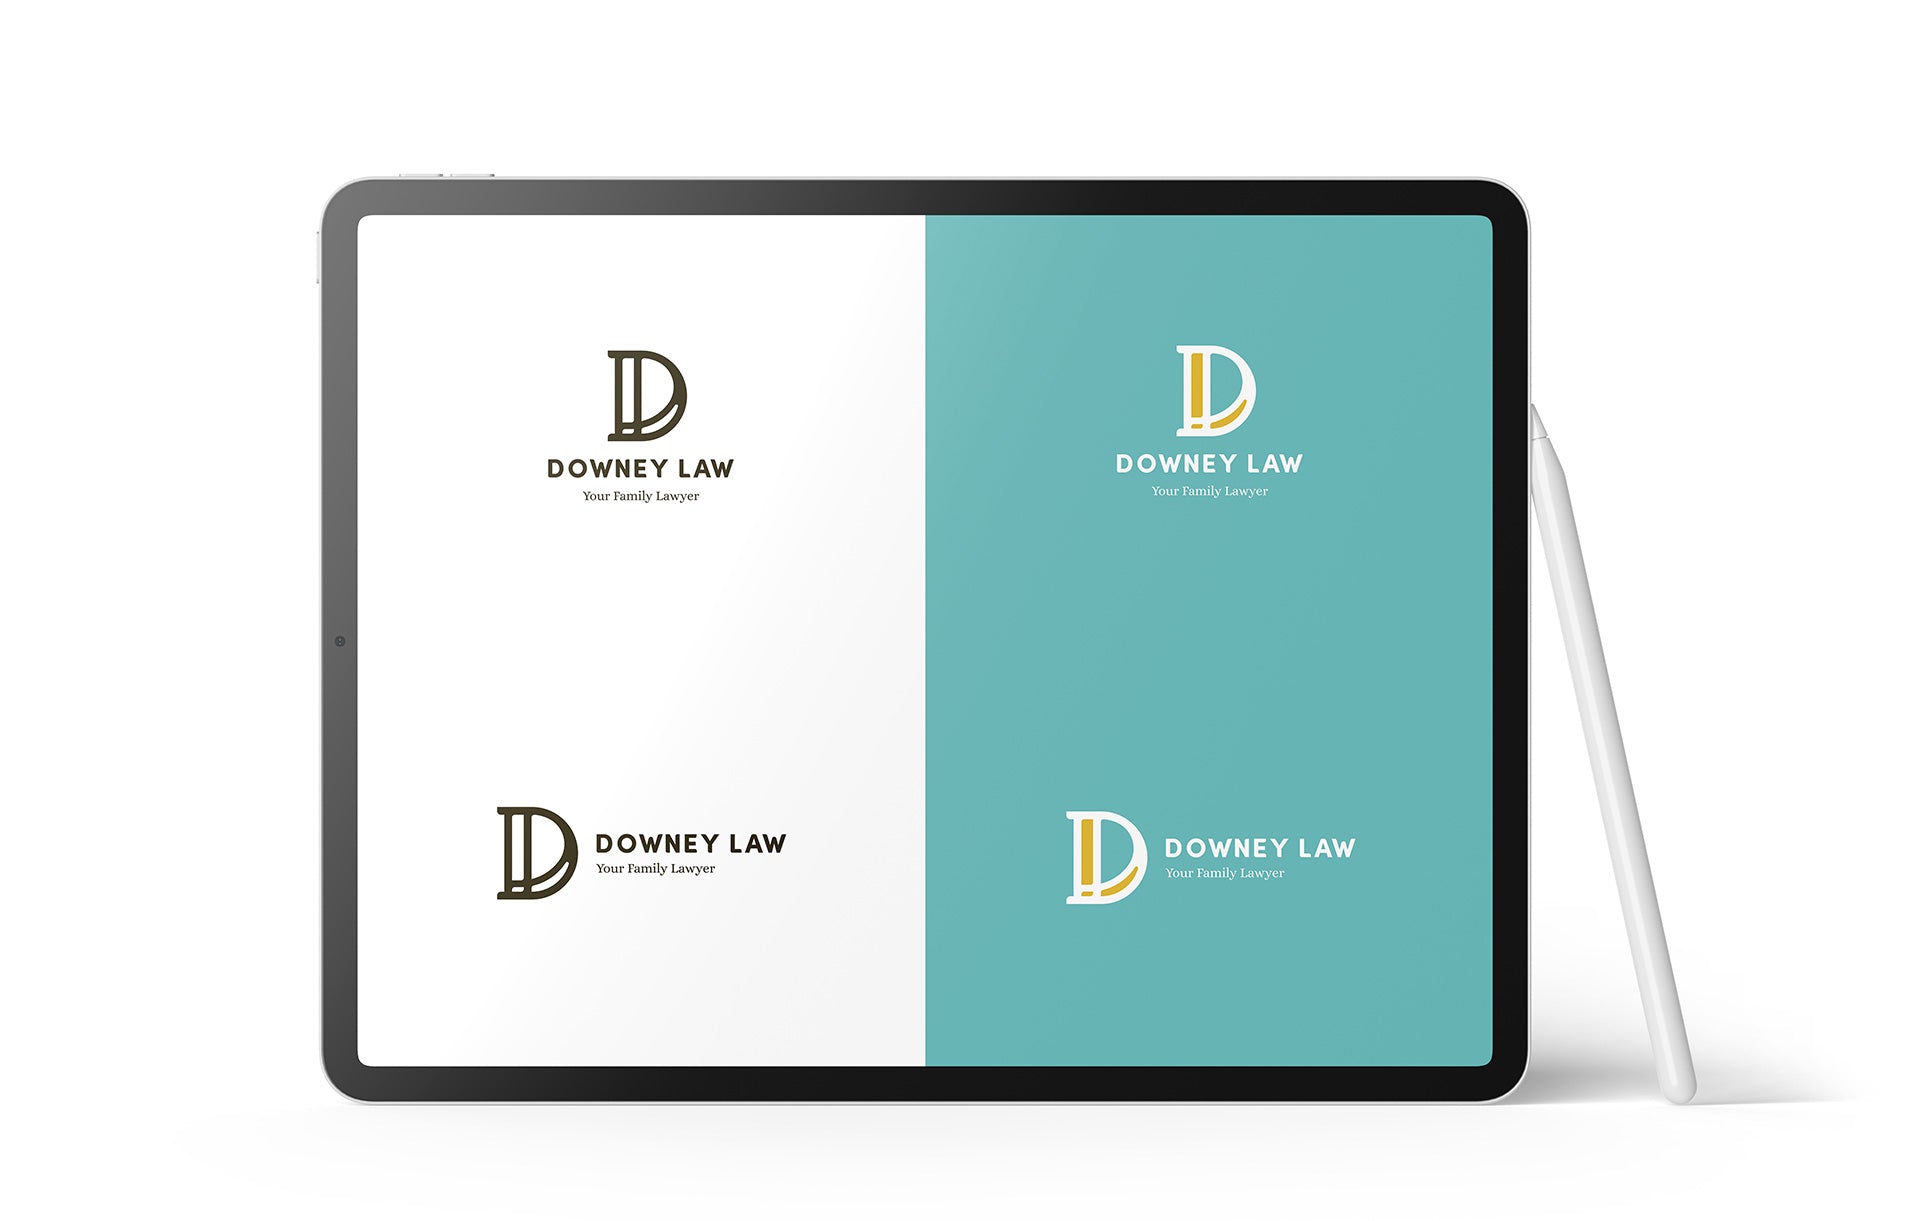 Downey Law - Brand Guidelines - Scott Luscombe - Creatibly